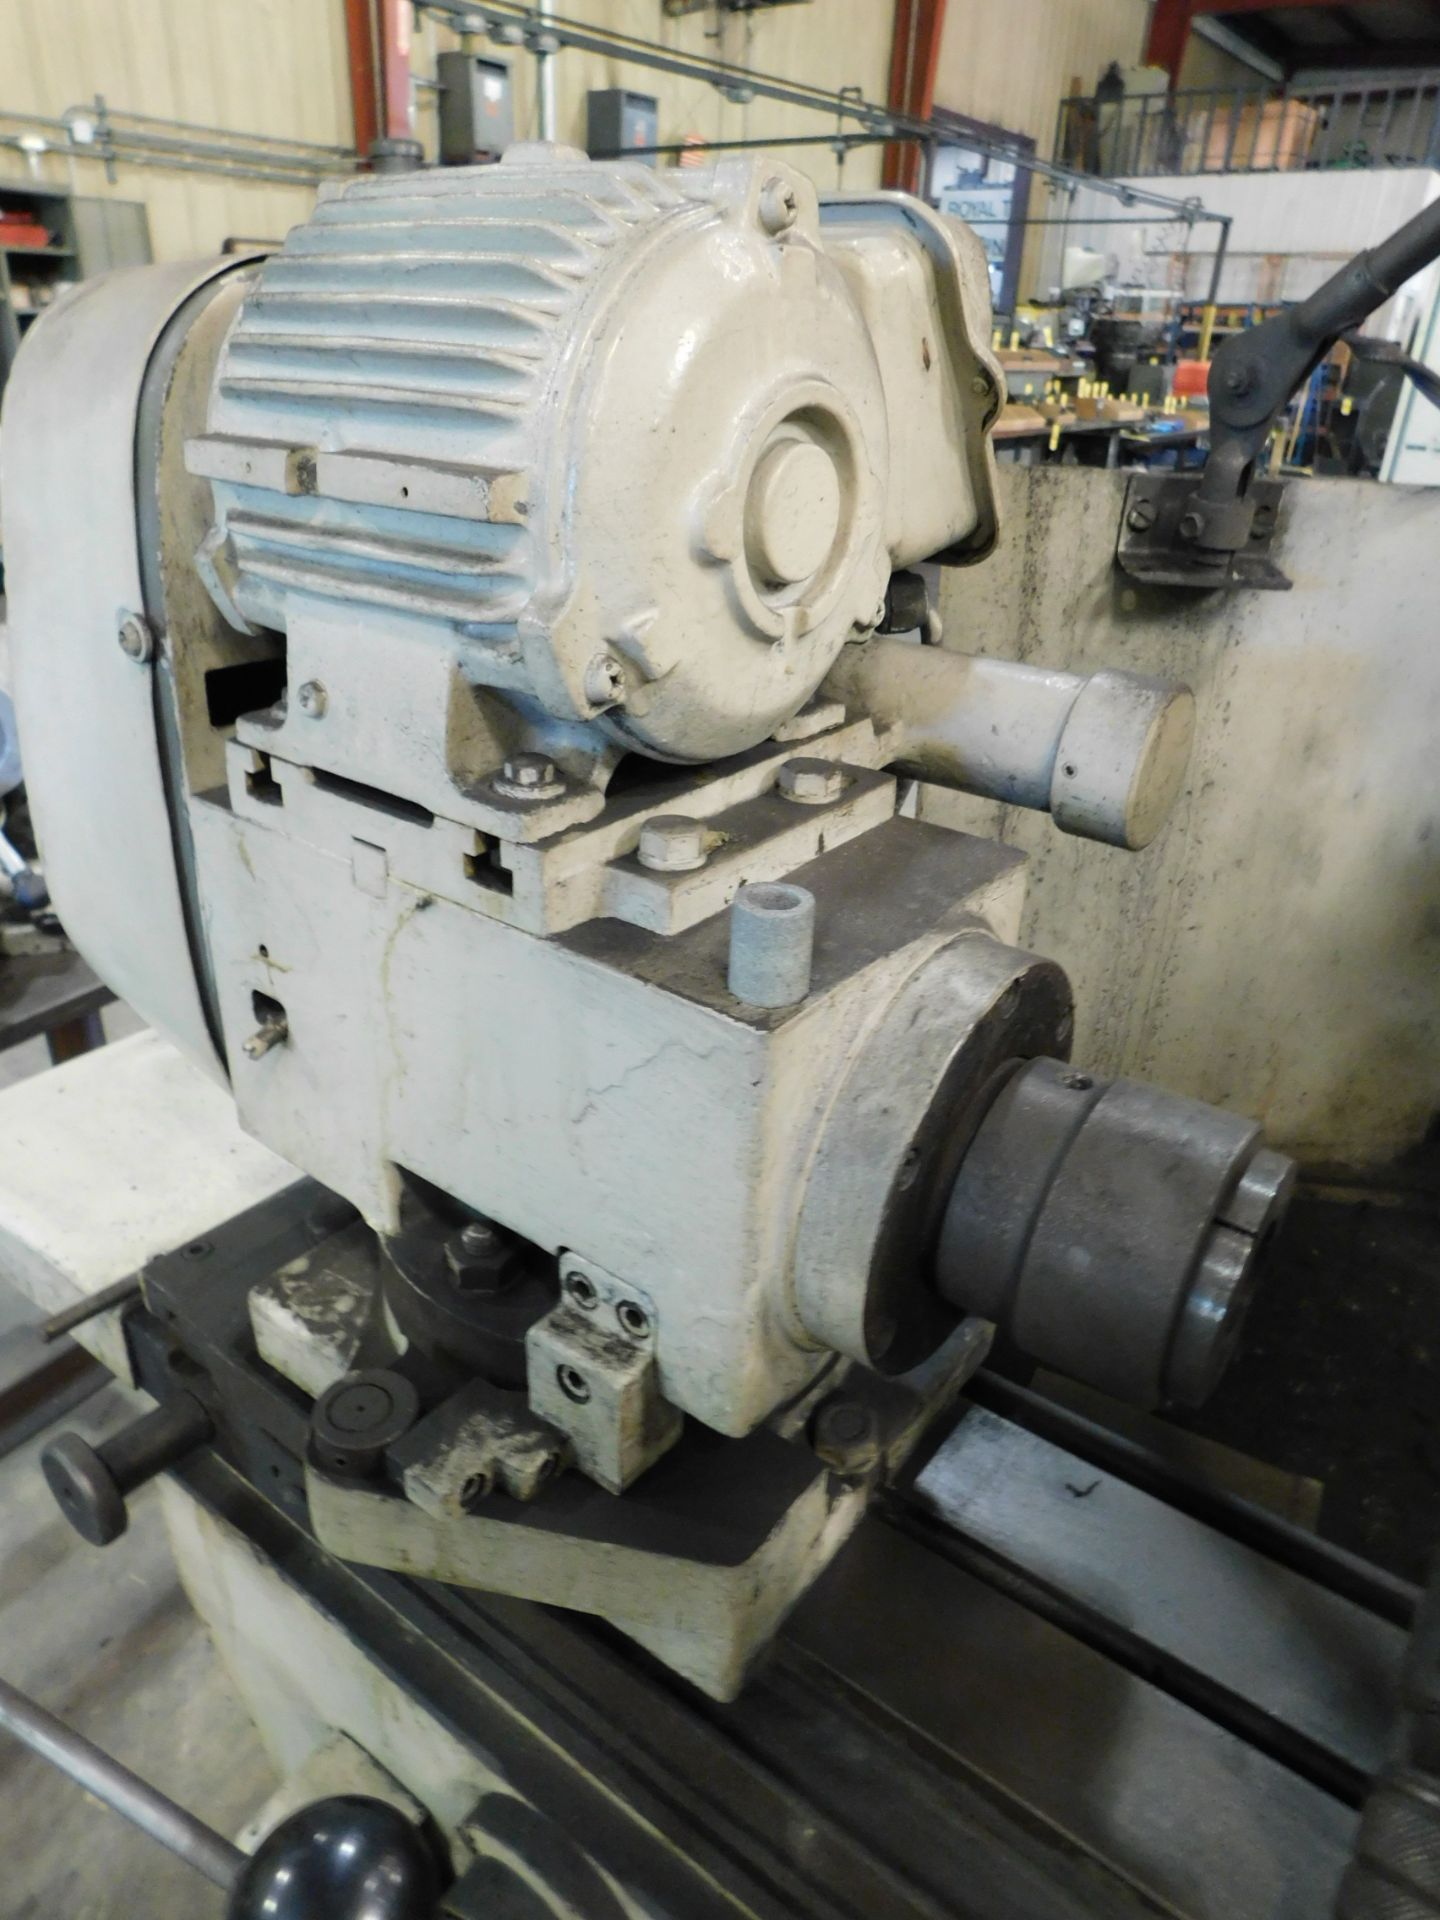 Fuji Tool Room Internal Grinder, 12 Inch Swing Capacity, Appears to be Parker Majestic Copy - Image 5 of 7